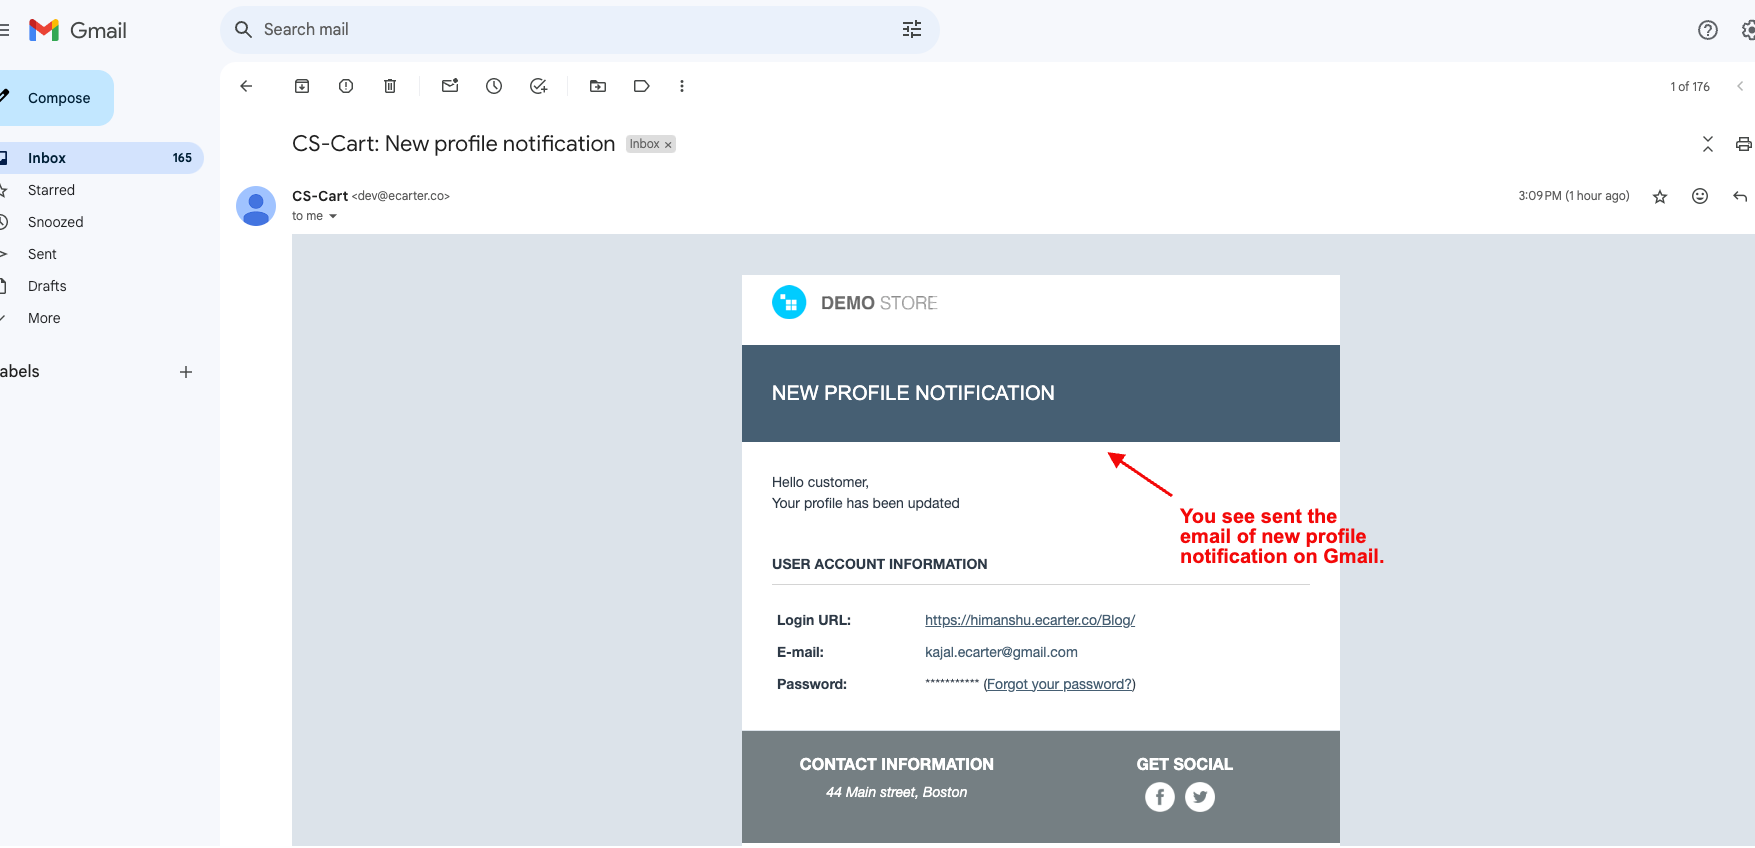 sent email of the new profile notification on Gmail